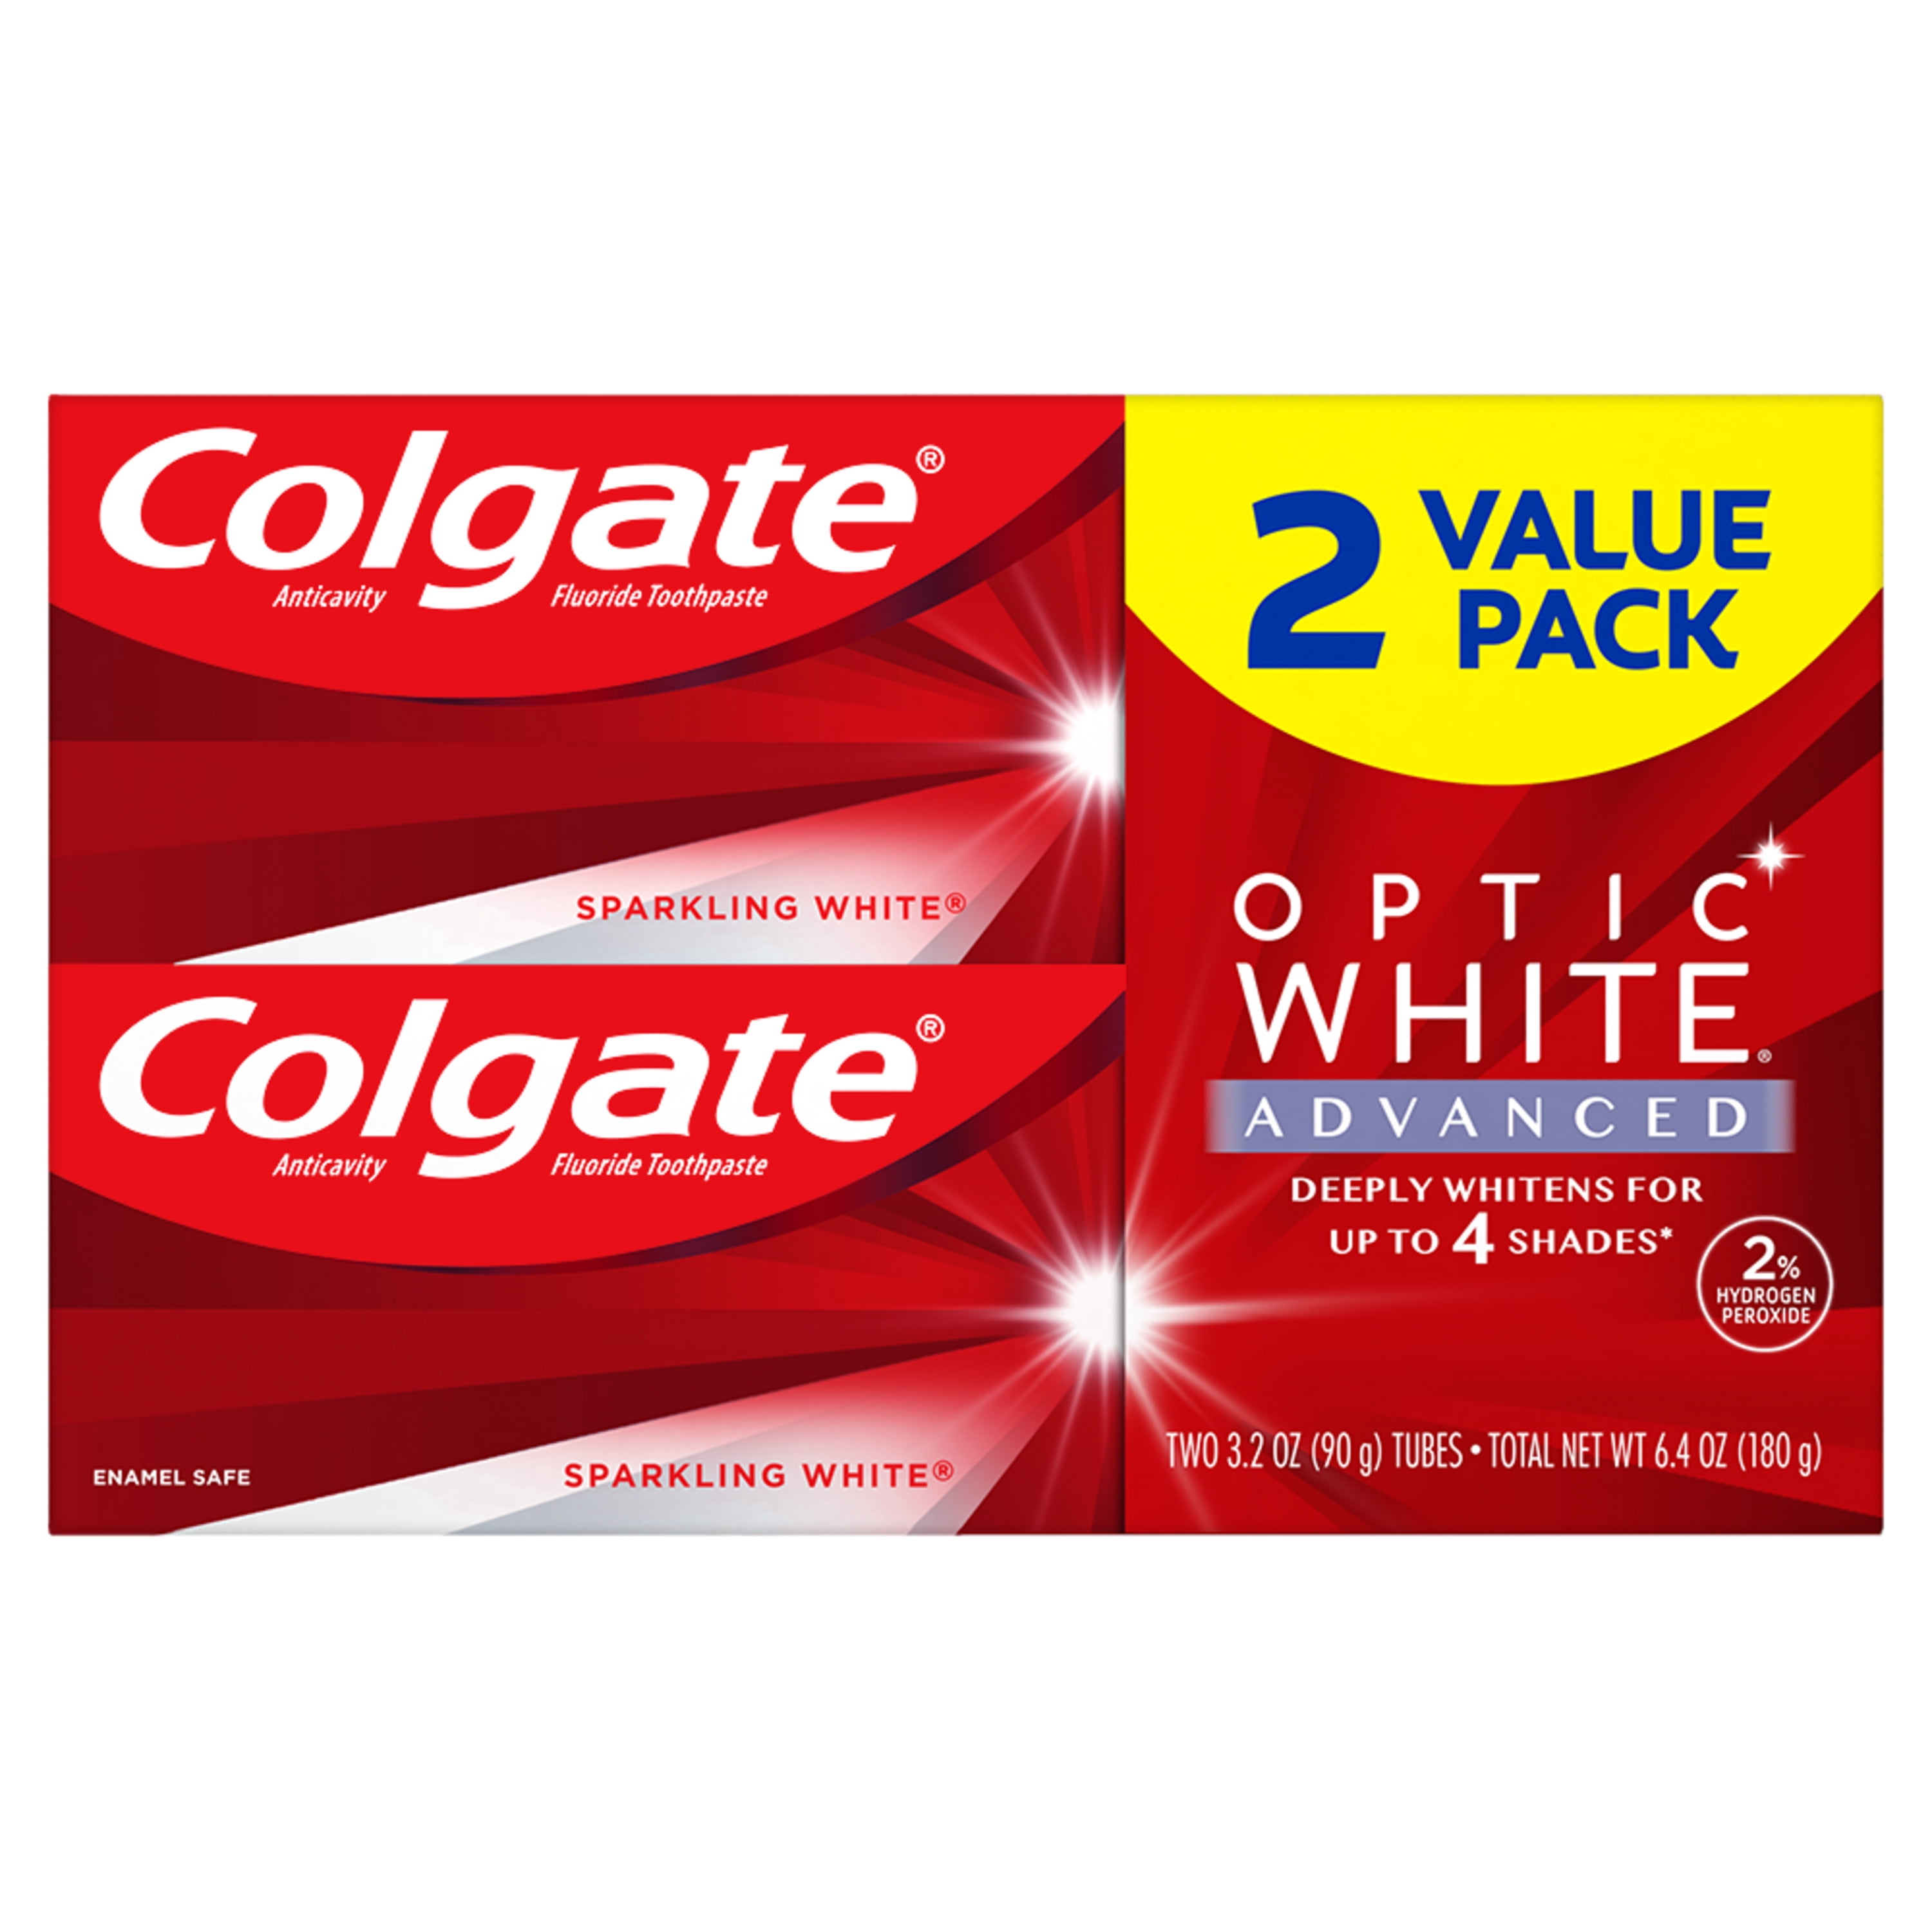 Colgate Optic White with Charcoal Teeth Whitening Toothpaste